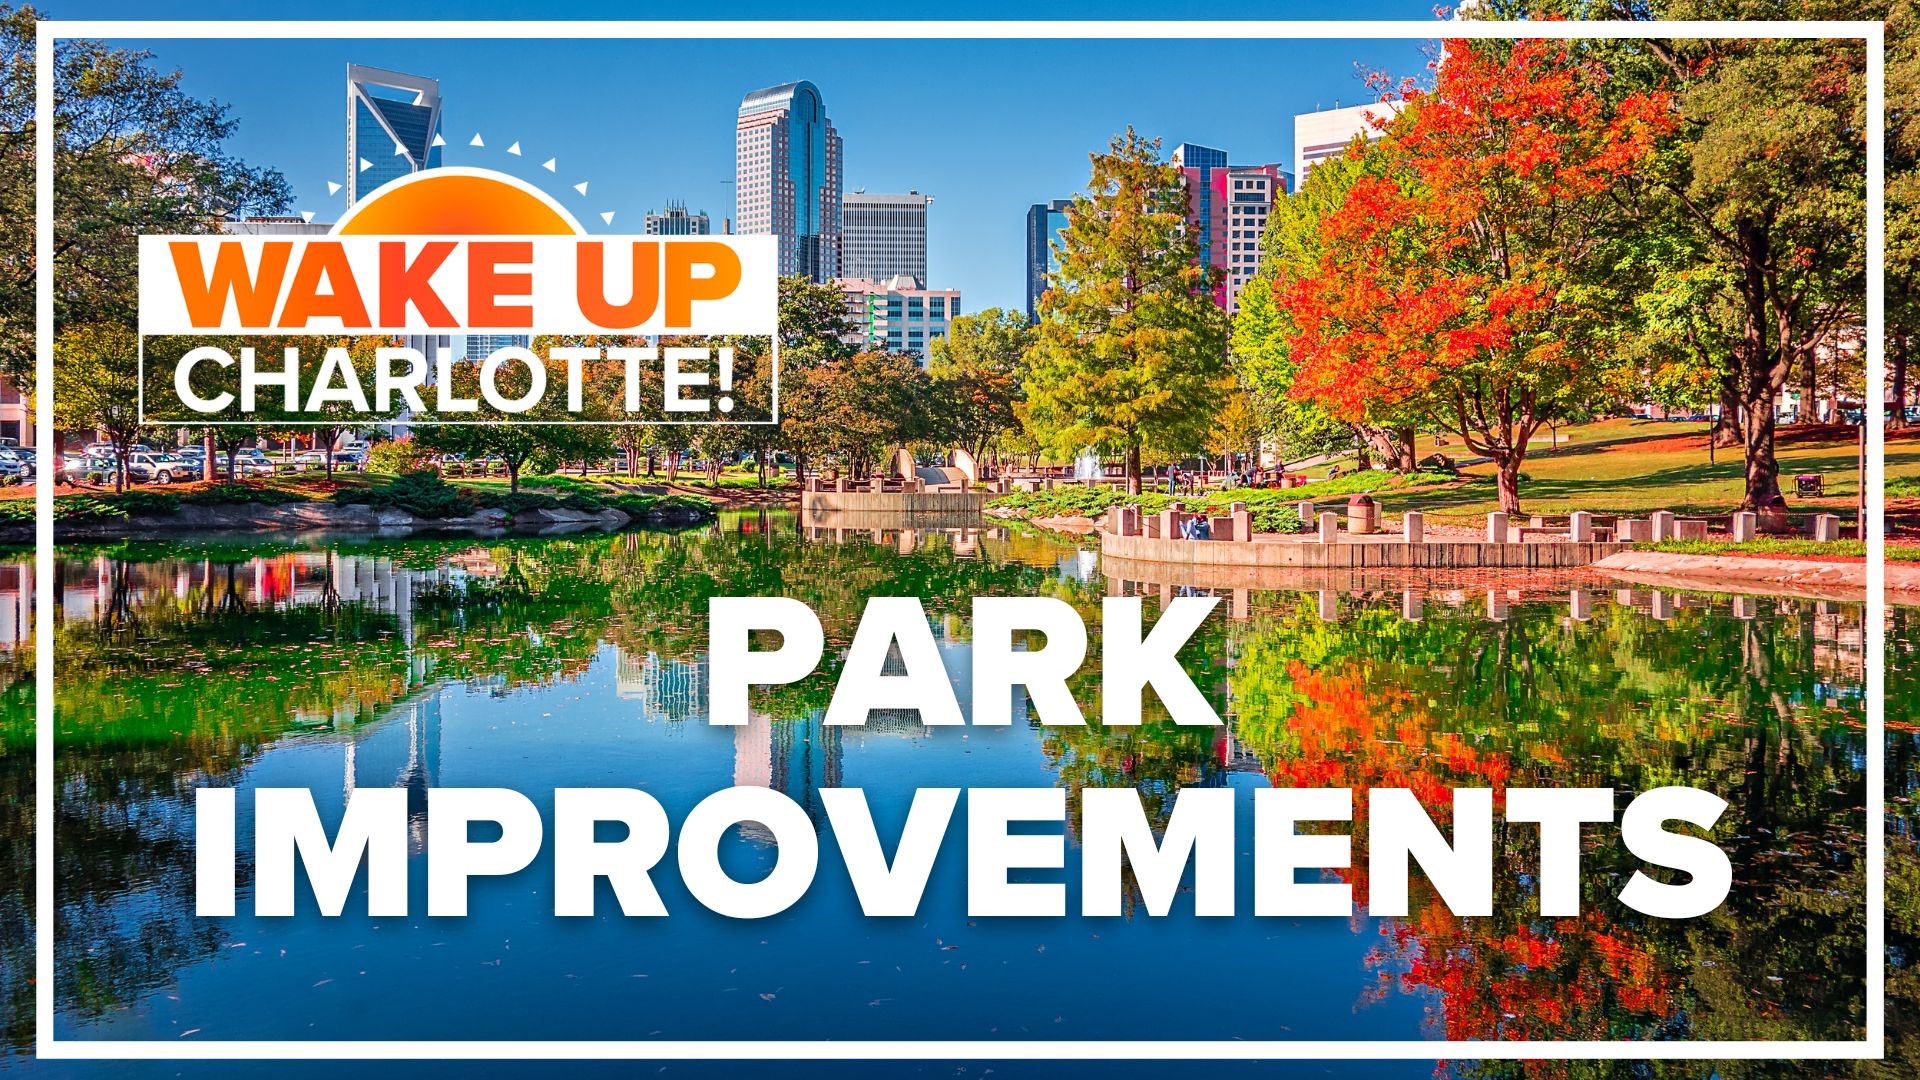 Mecklenburg County is set to use millions of dollars in COVID-19 funding to improve public parks. How do you believe that money should be used?